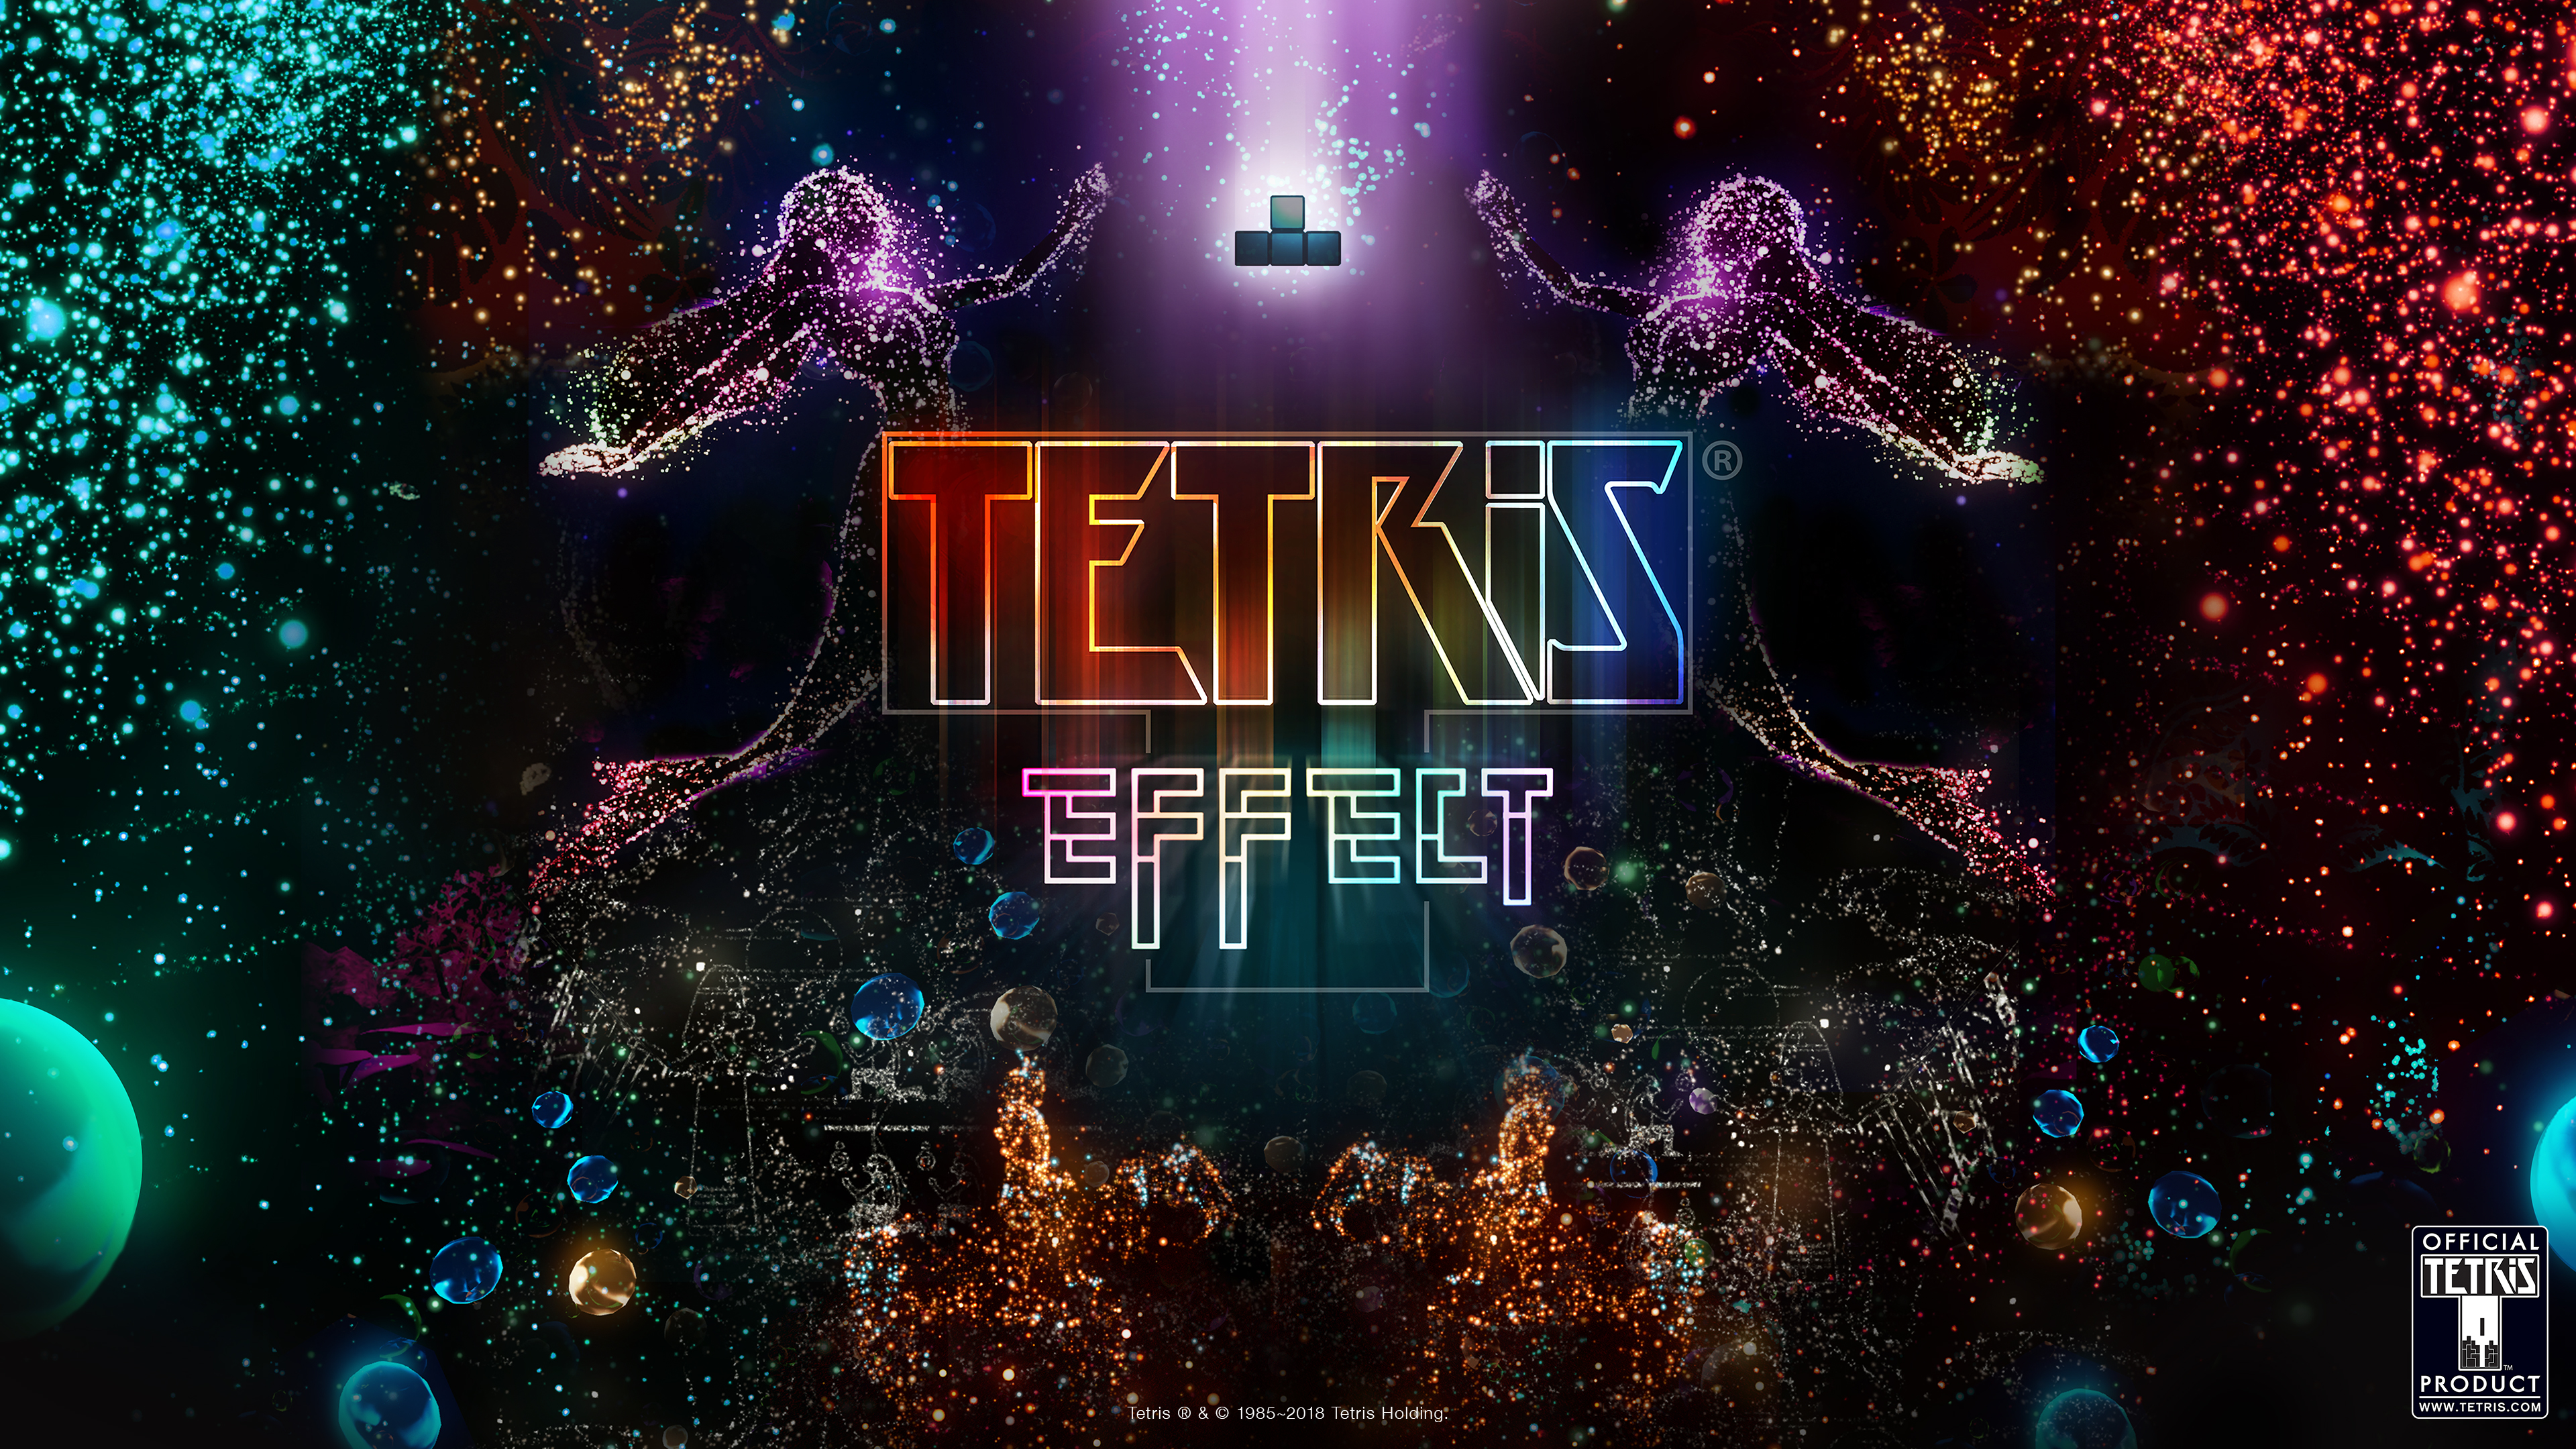 Tetris Effect Review - Experience Tranquility - The Koalition